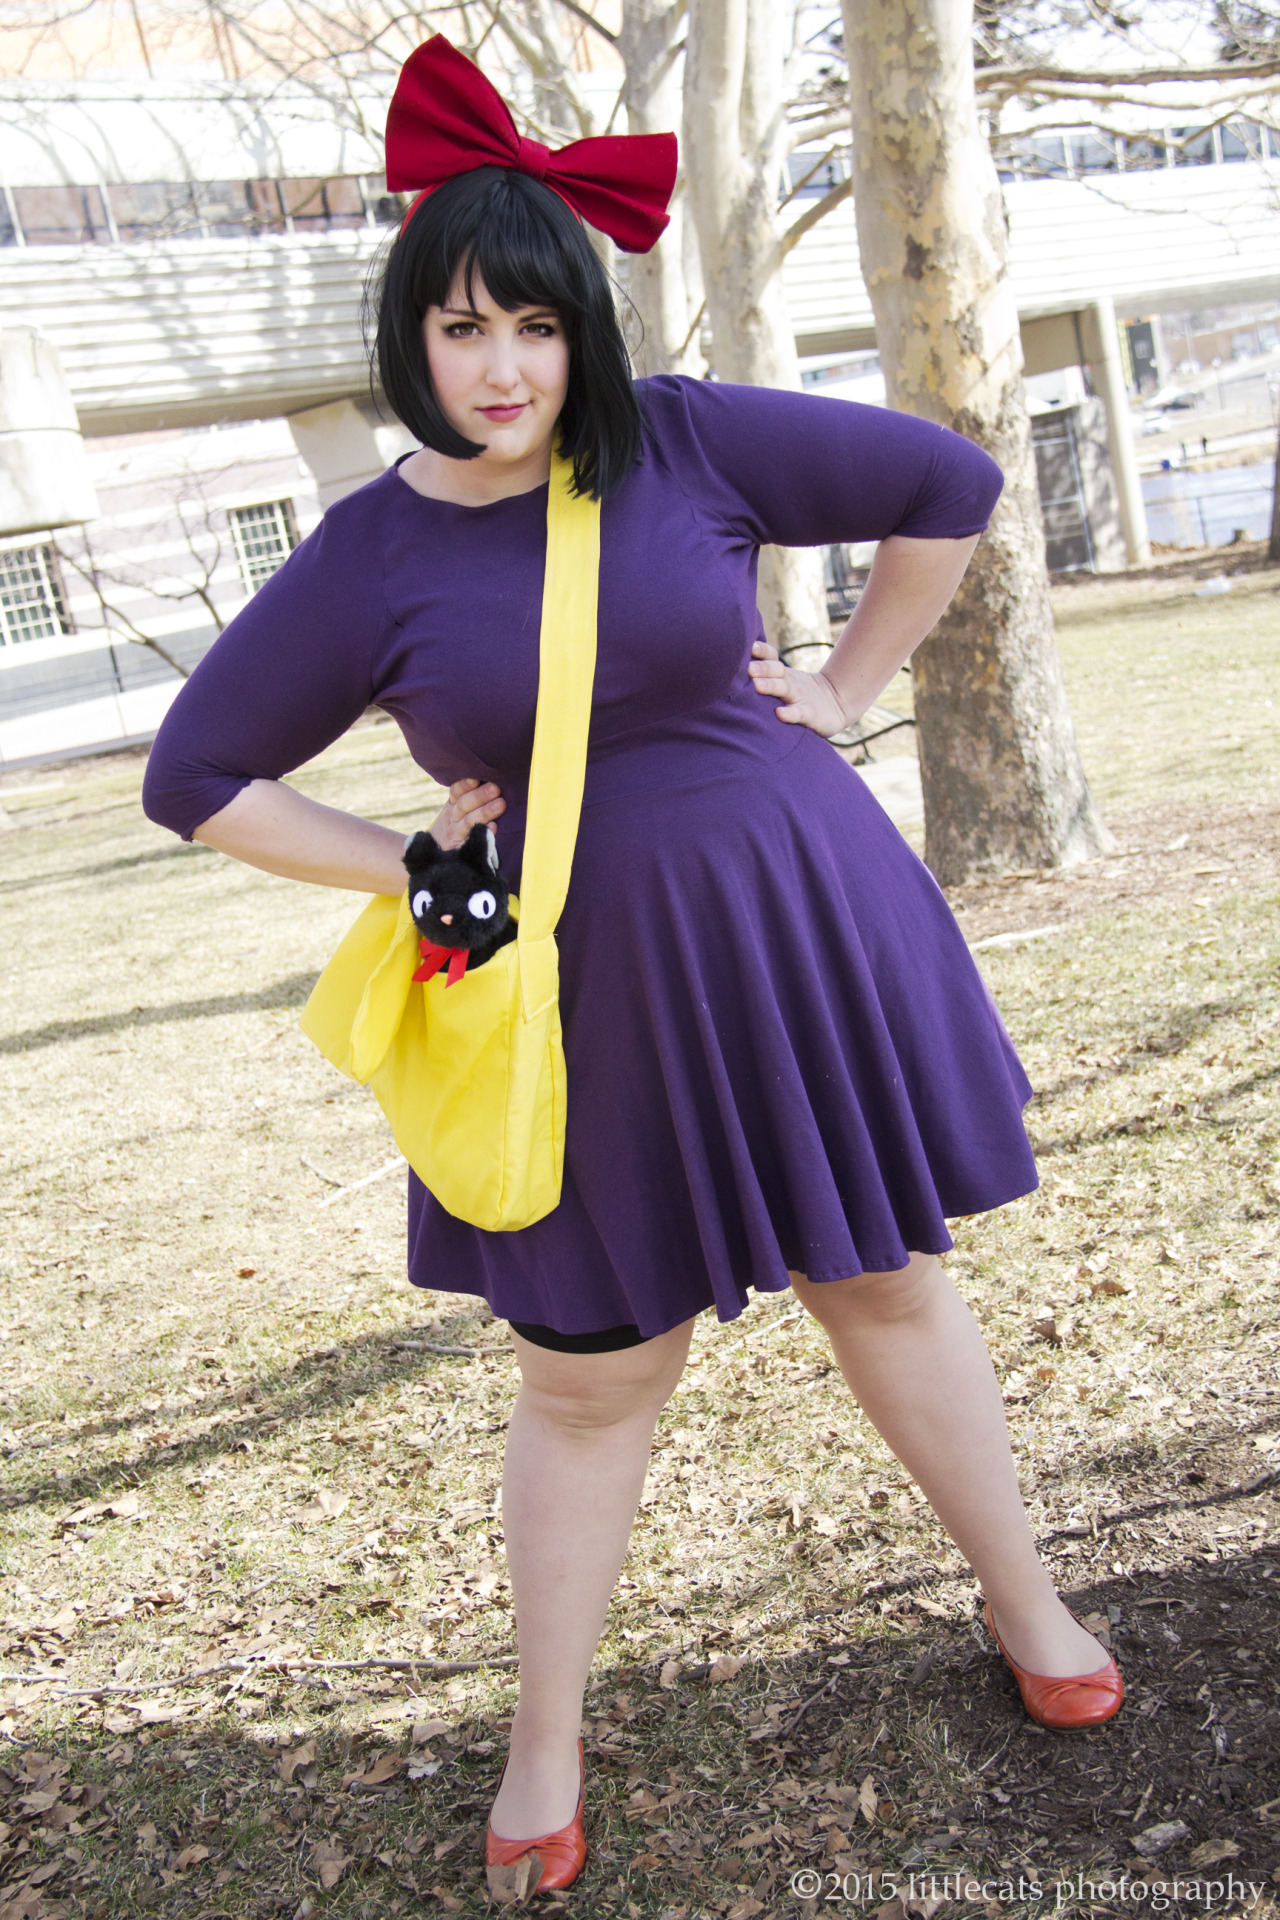 Geeking out loud: The Best Plus Size Cosplays to try out!  Writing into the Ether